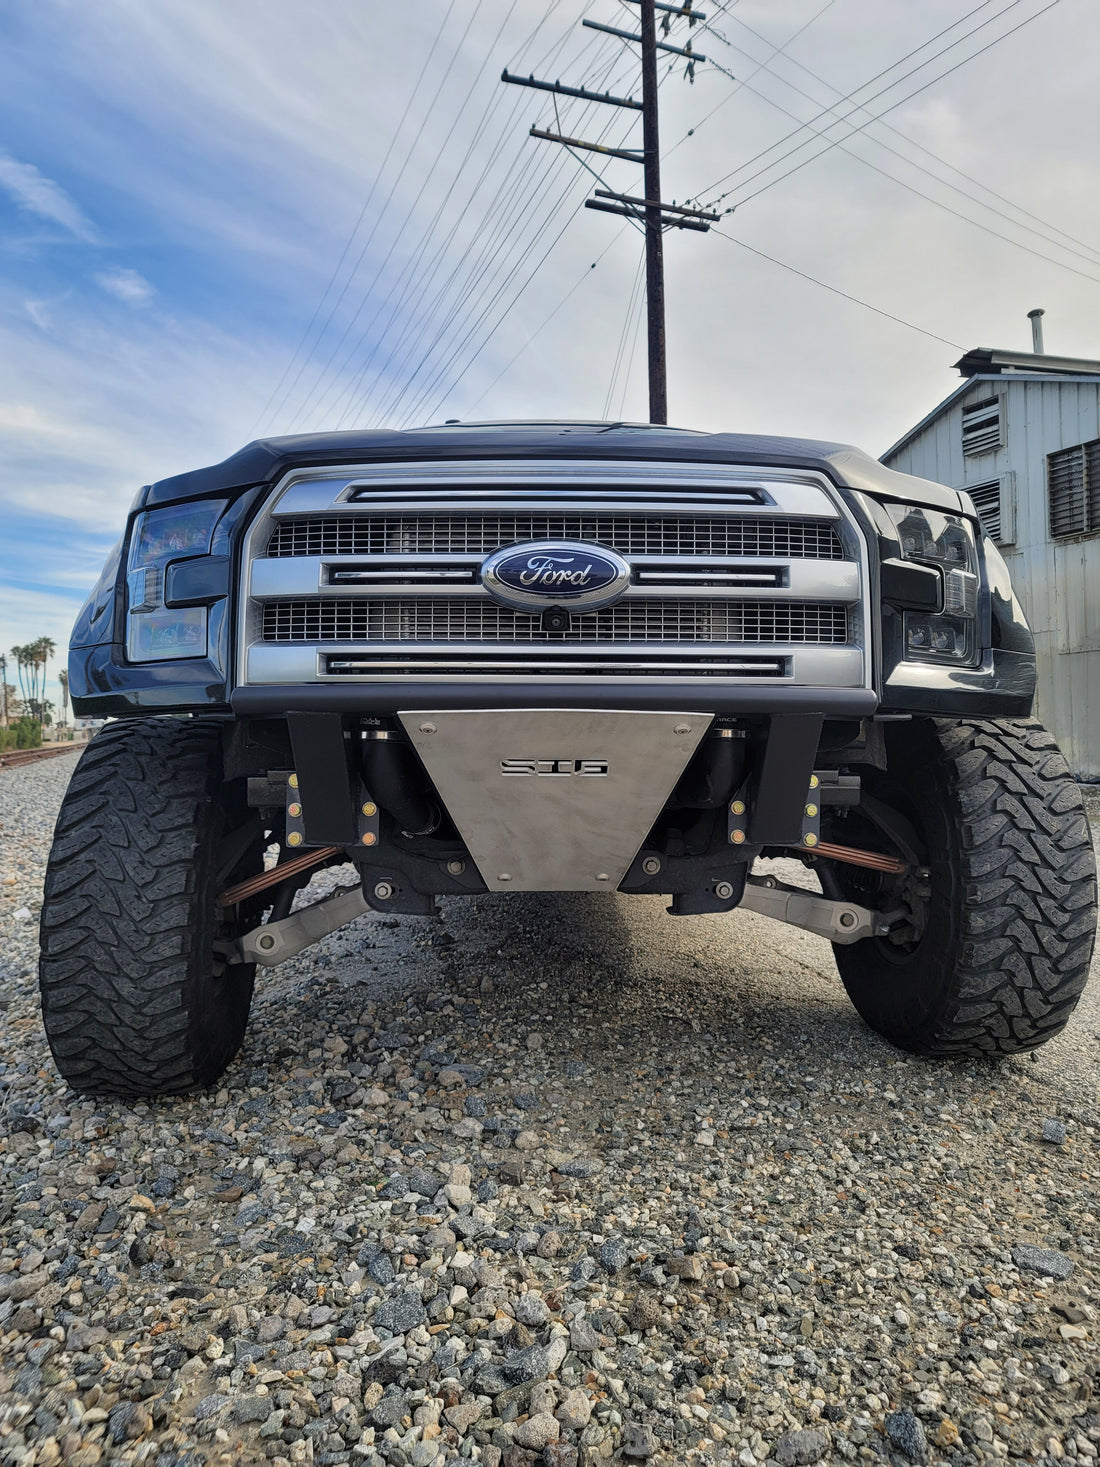 2015-2017 Ford F150 2017-2021 Ford Raptor "El Chiquito" Front Bumper